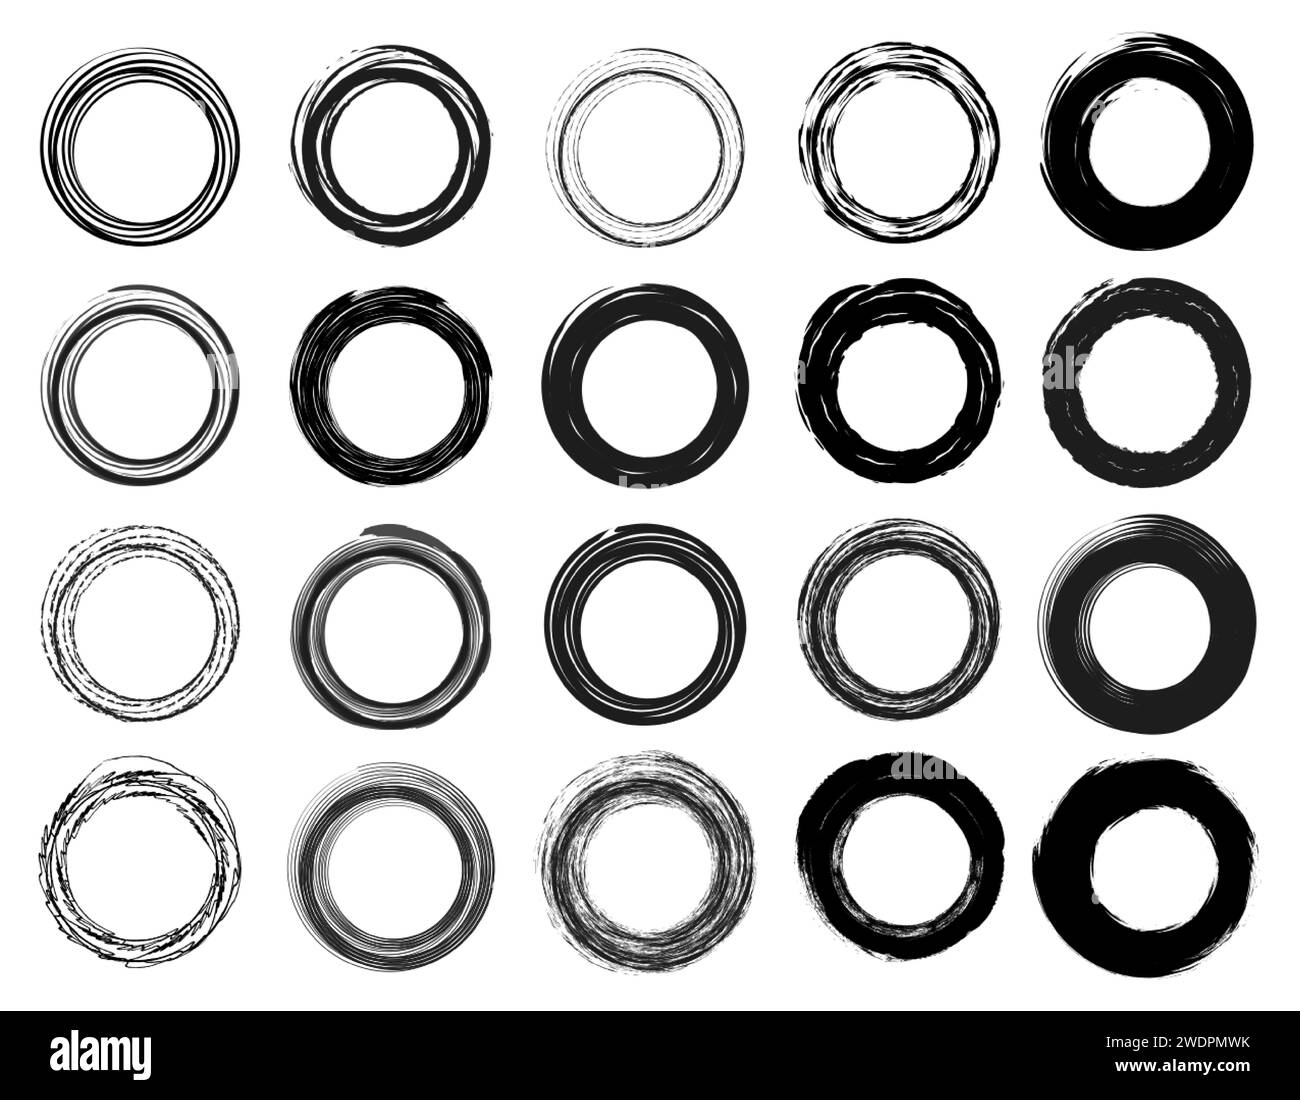 Grunge distressed circle set collection. Circles Frame border brush stroke style. Black lines in circle form, grungy texture elements isolated Stock Vector